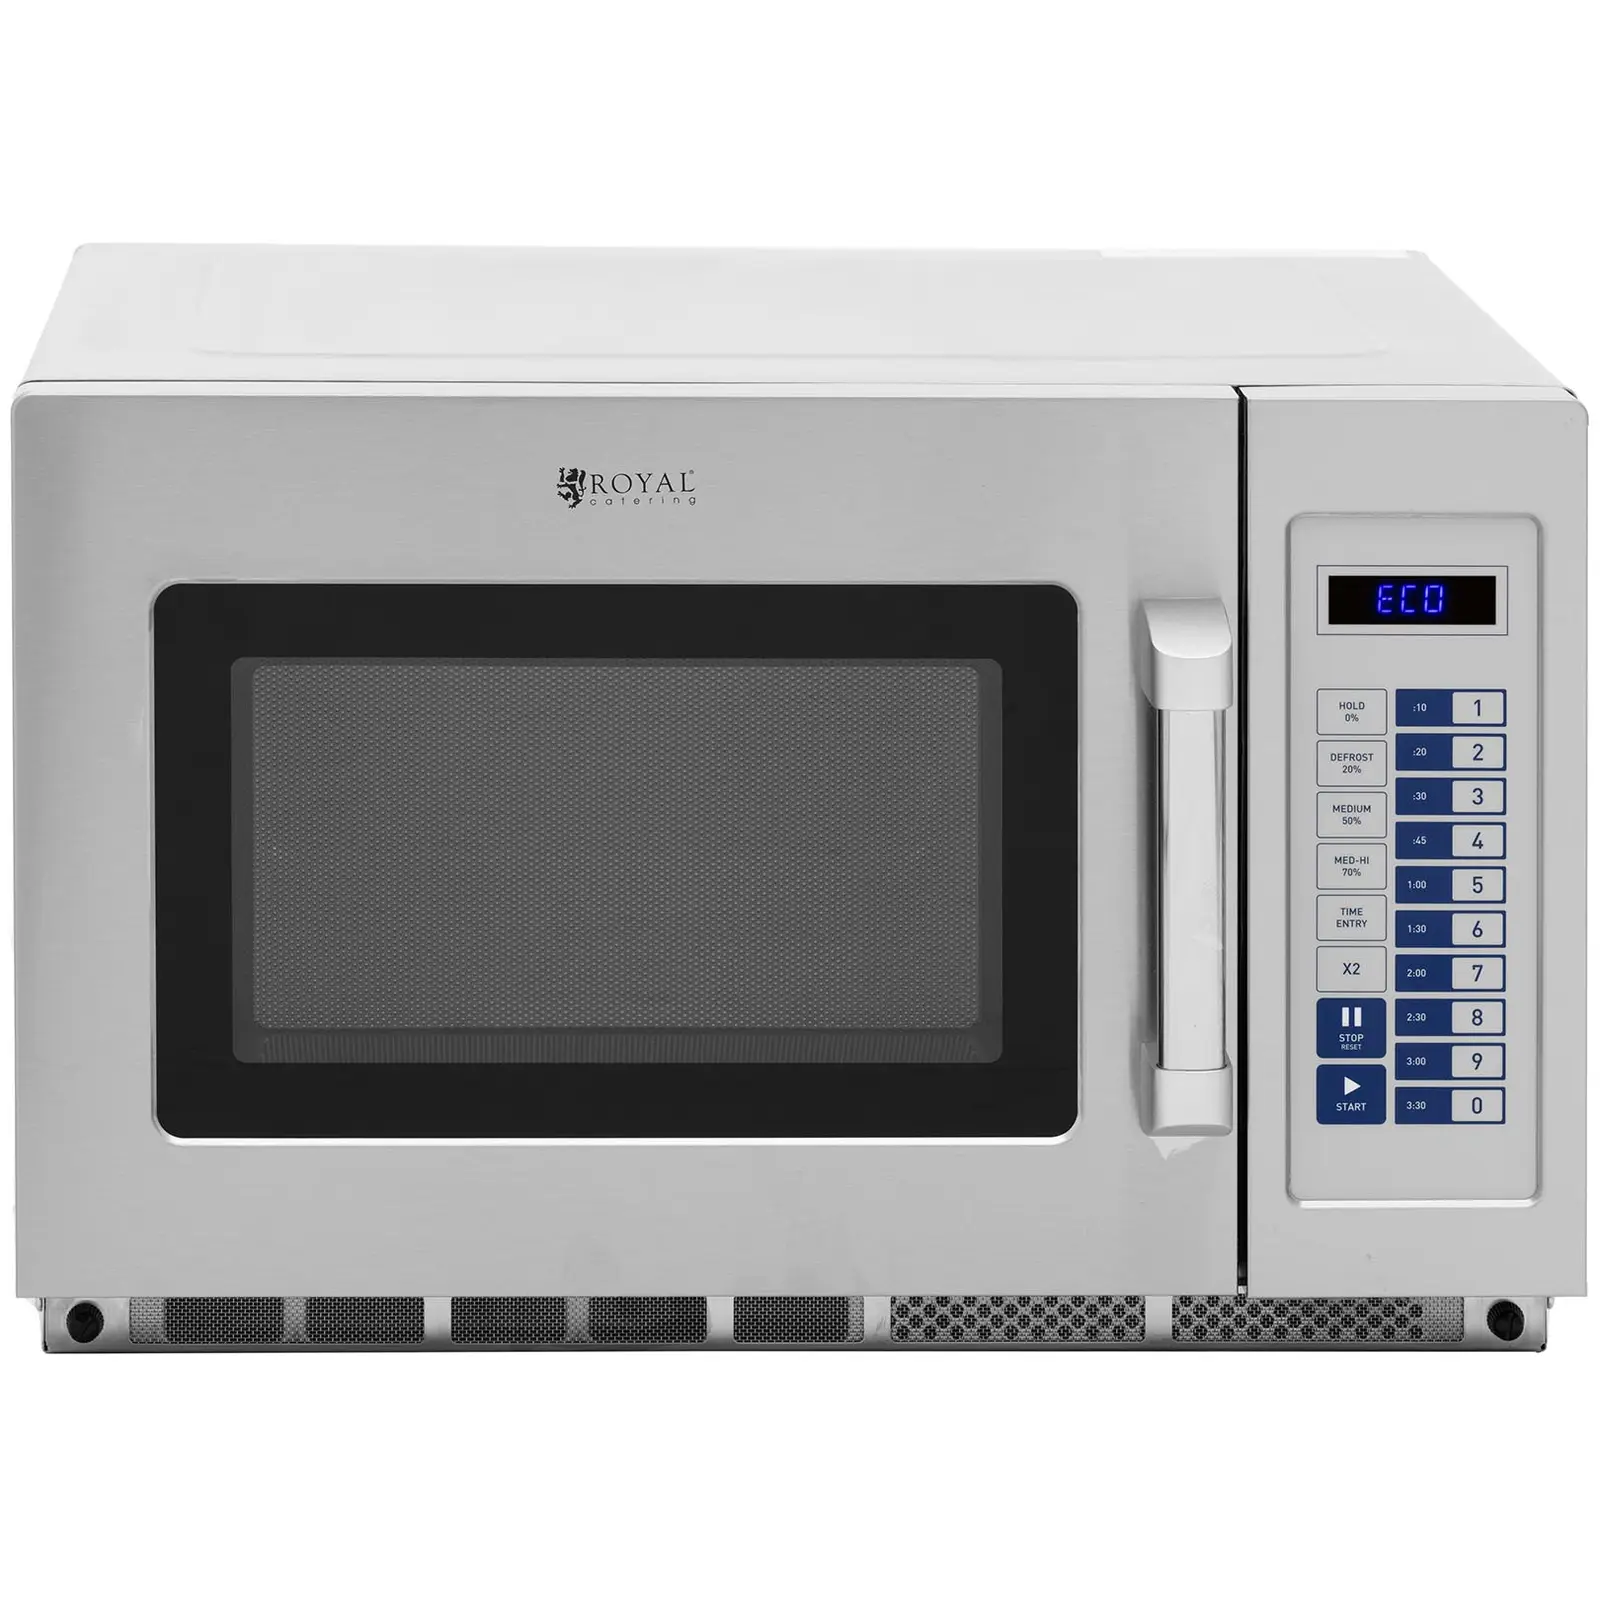 Mikroovn - 3200 W - 34 l - Royal Catering